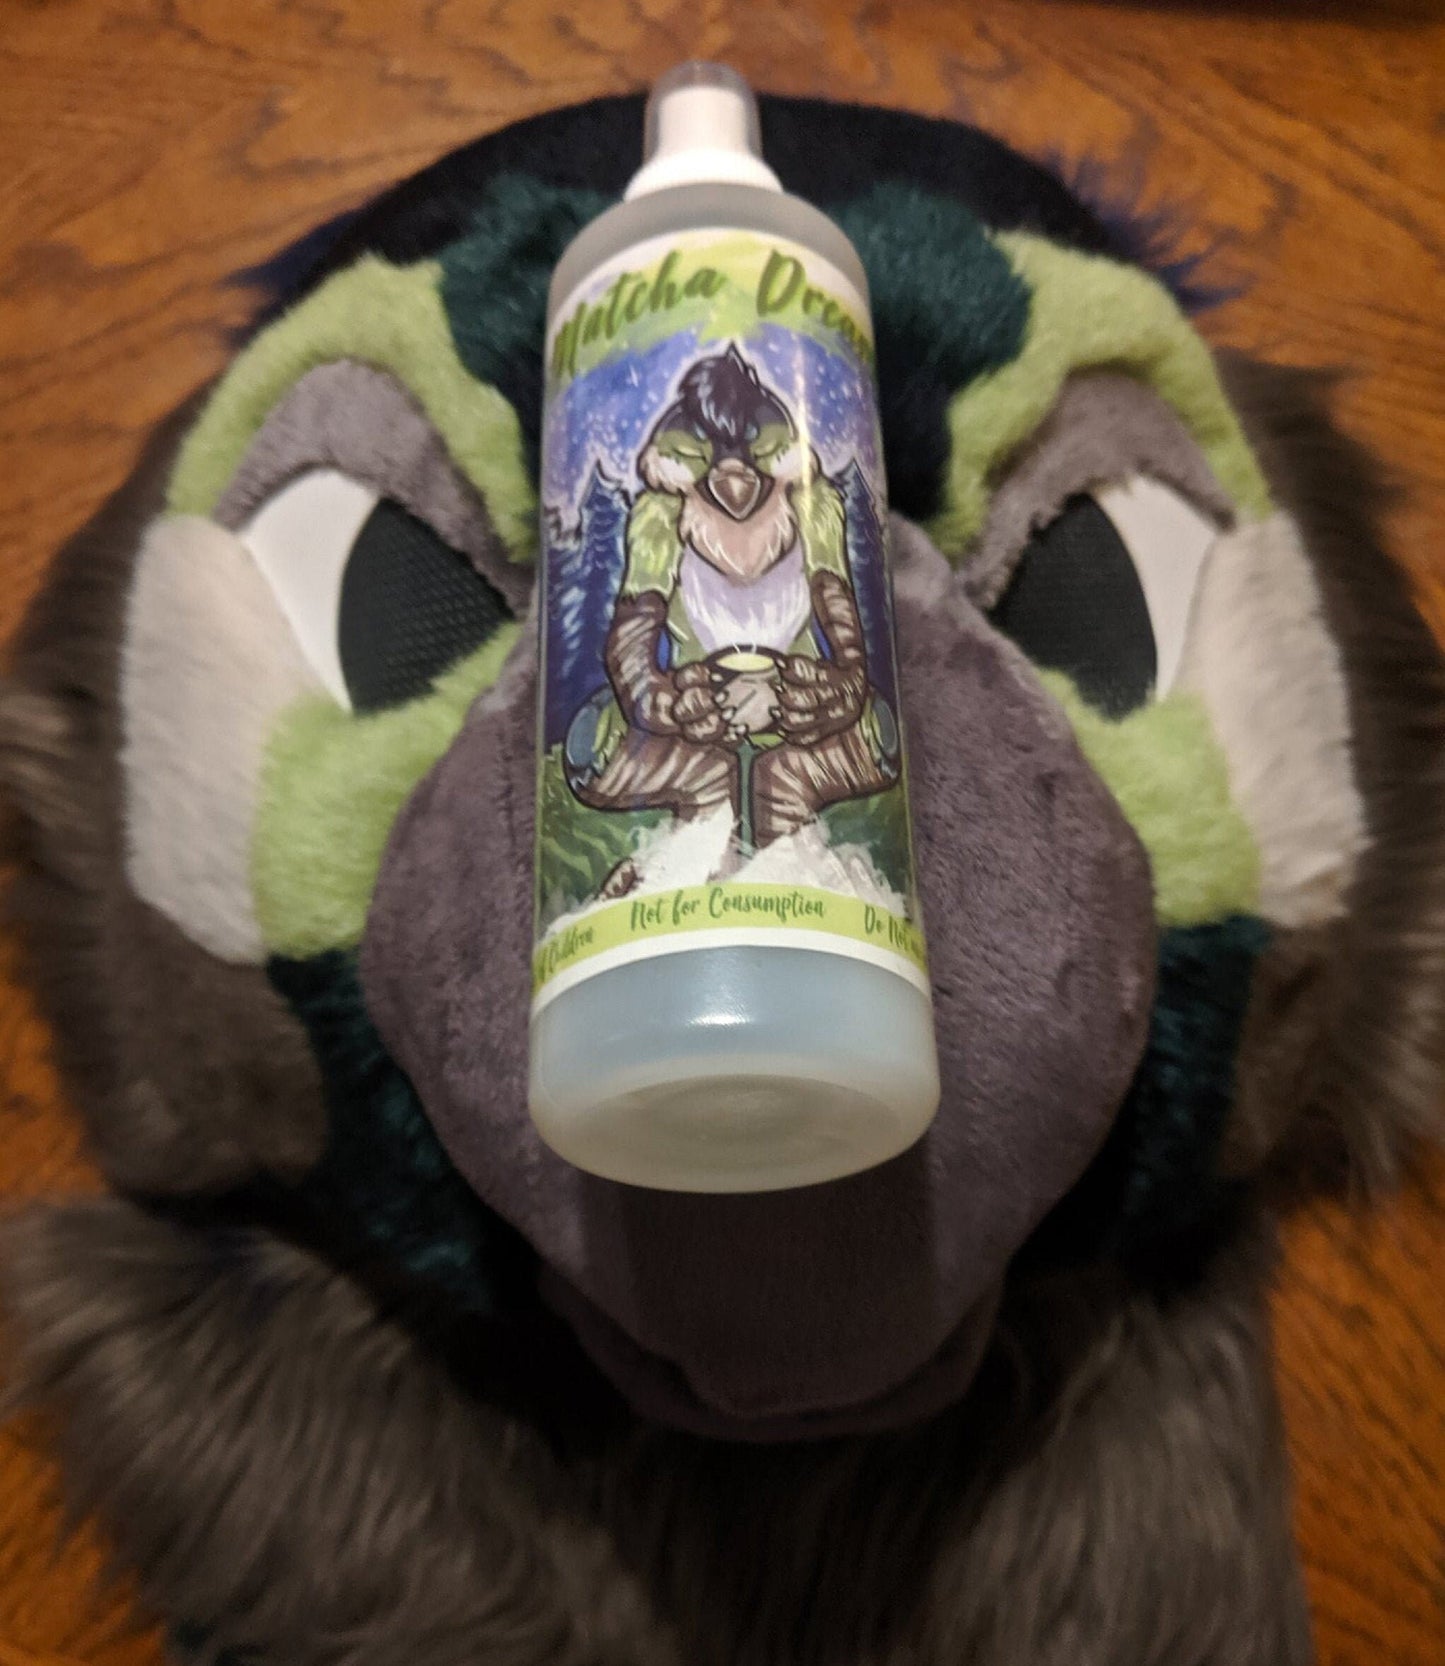 LAST CHANCE - Fursuit Spray Matcha Dream Green Tea - Bottle Fragrance and Cleaner 8oz Essential Cleaning Costume Cleaner US Buyers Only